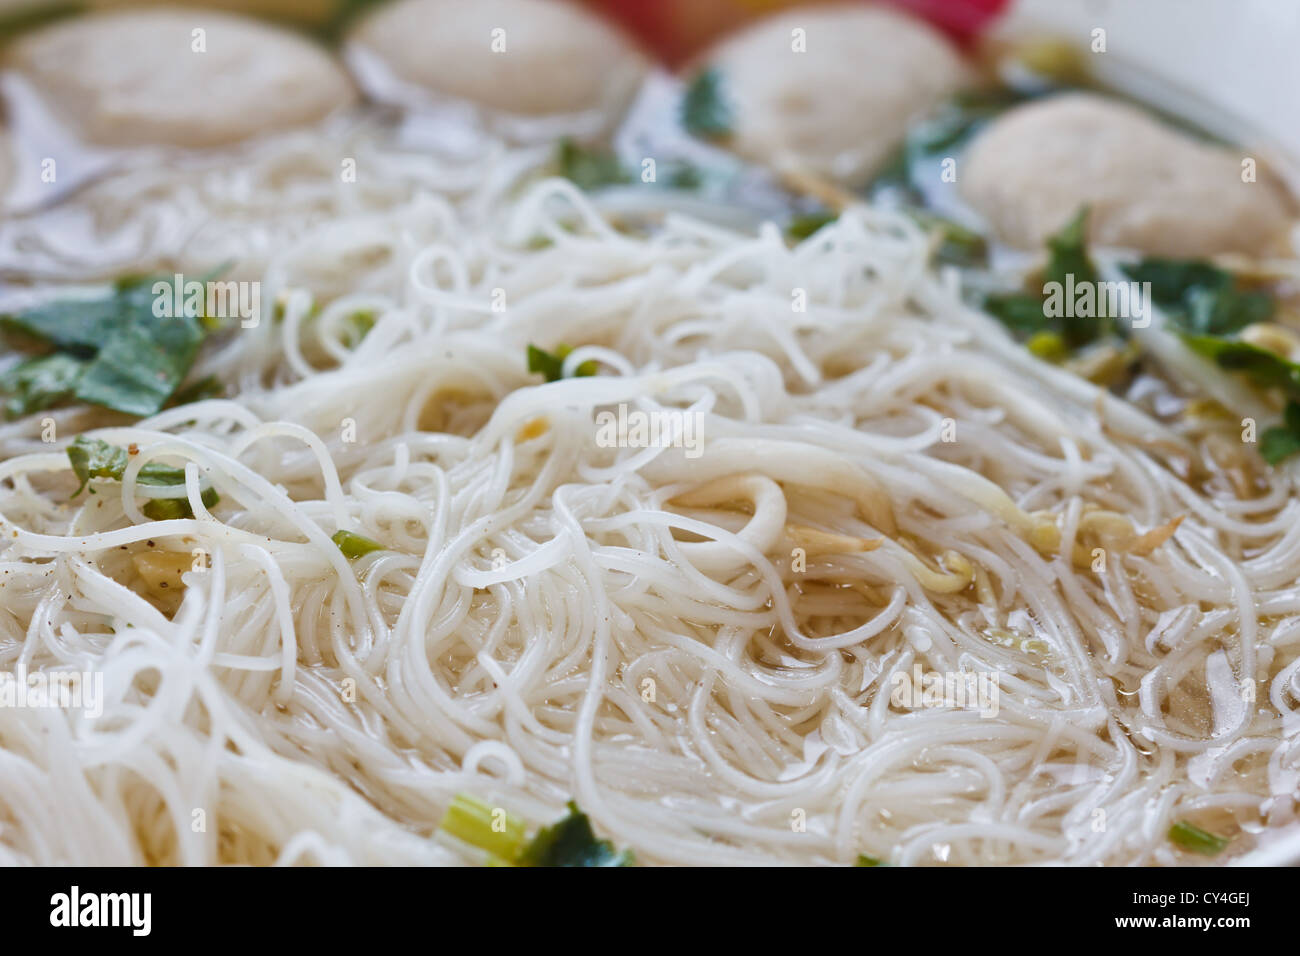 Asian cuisine, rice noodles with fish ball and meat ball Stock Photo